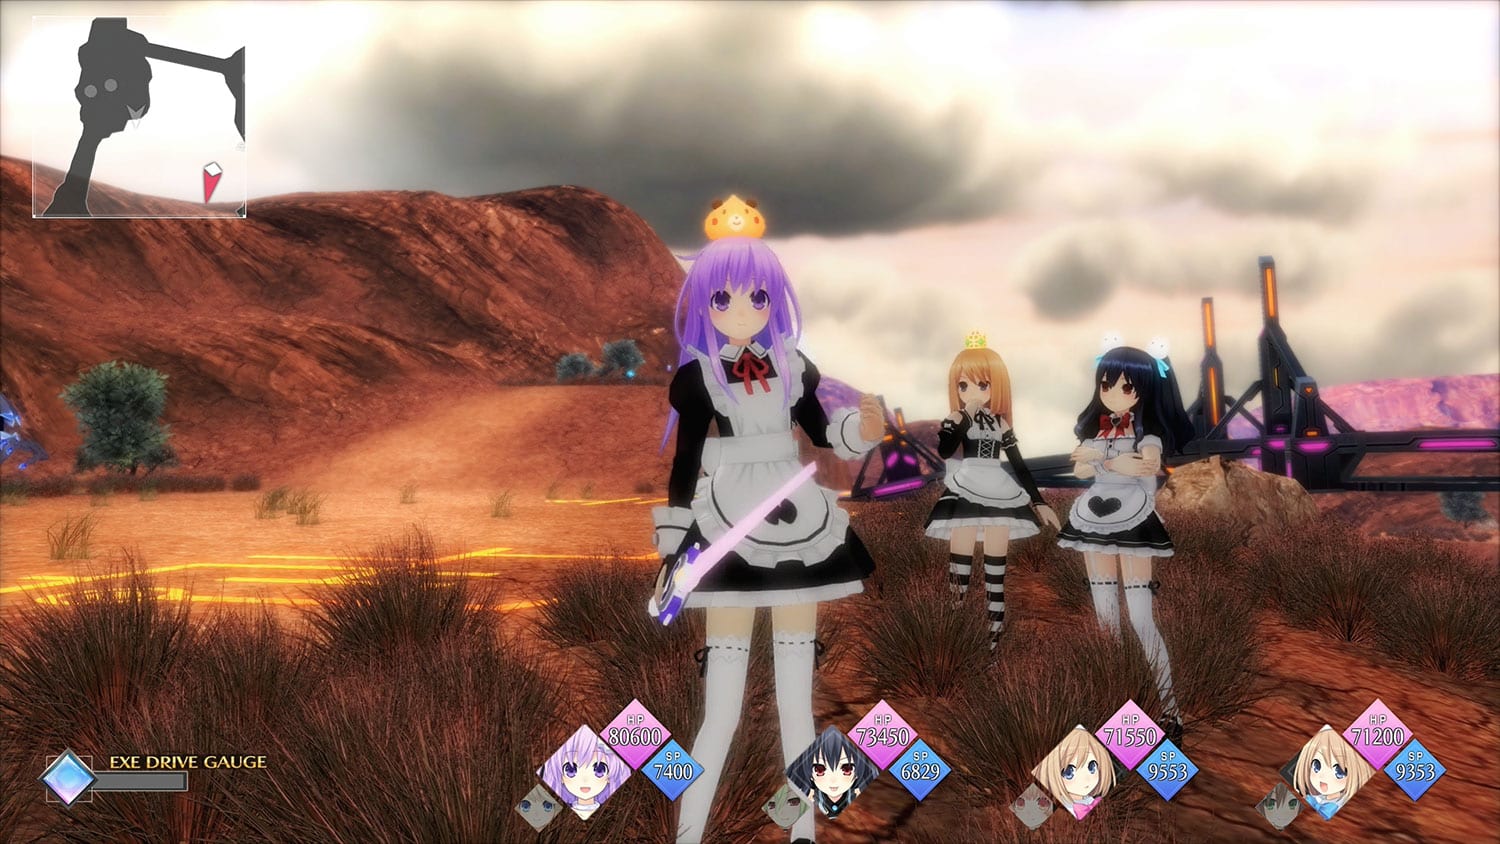 An Image from Neptunia Reverse